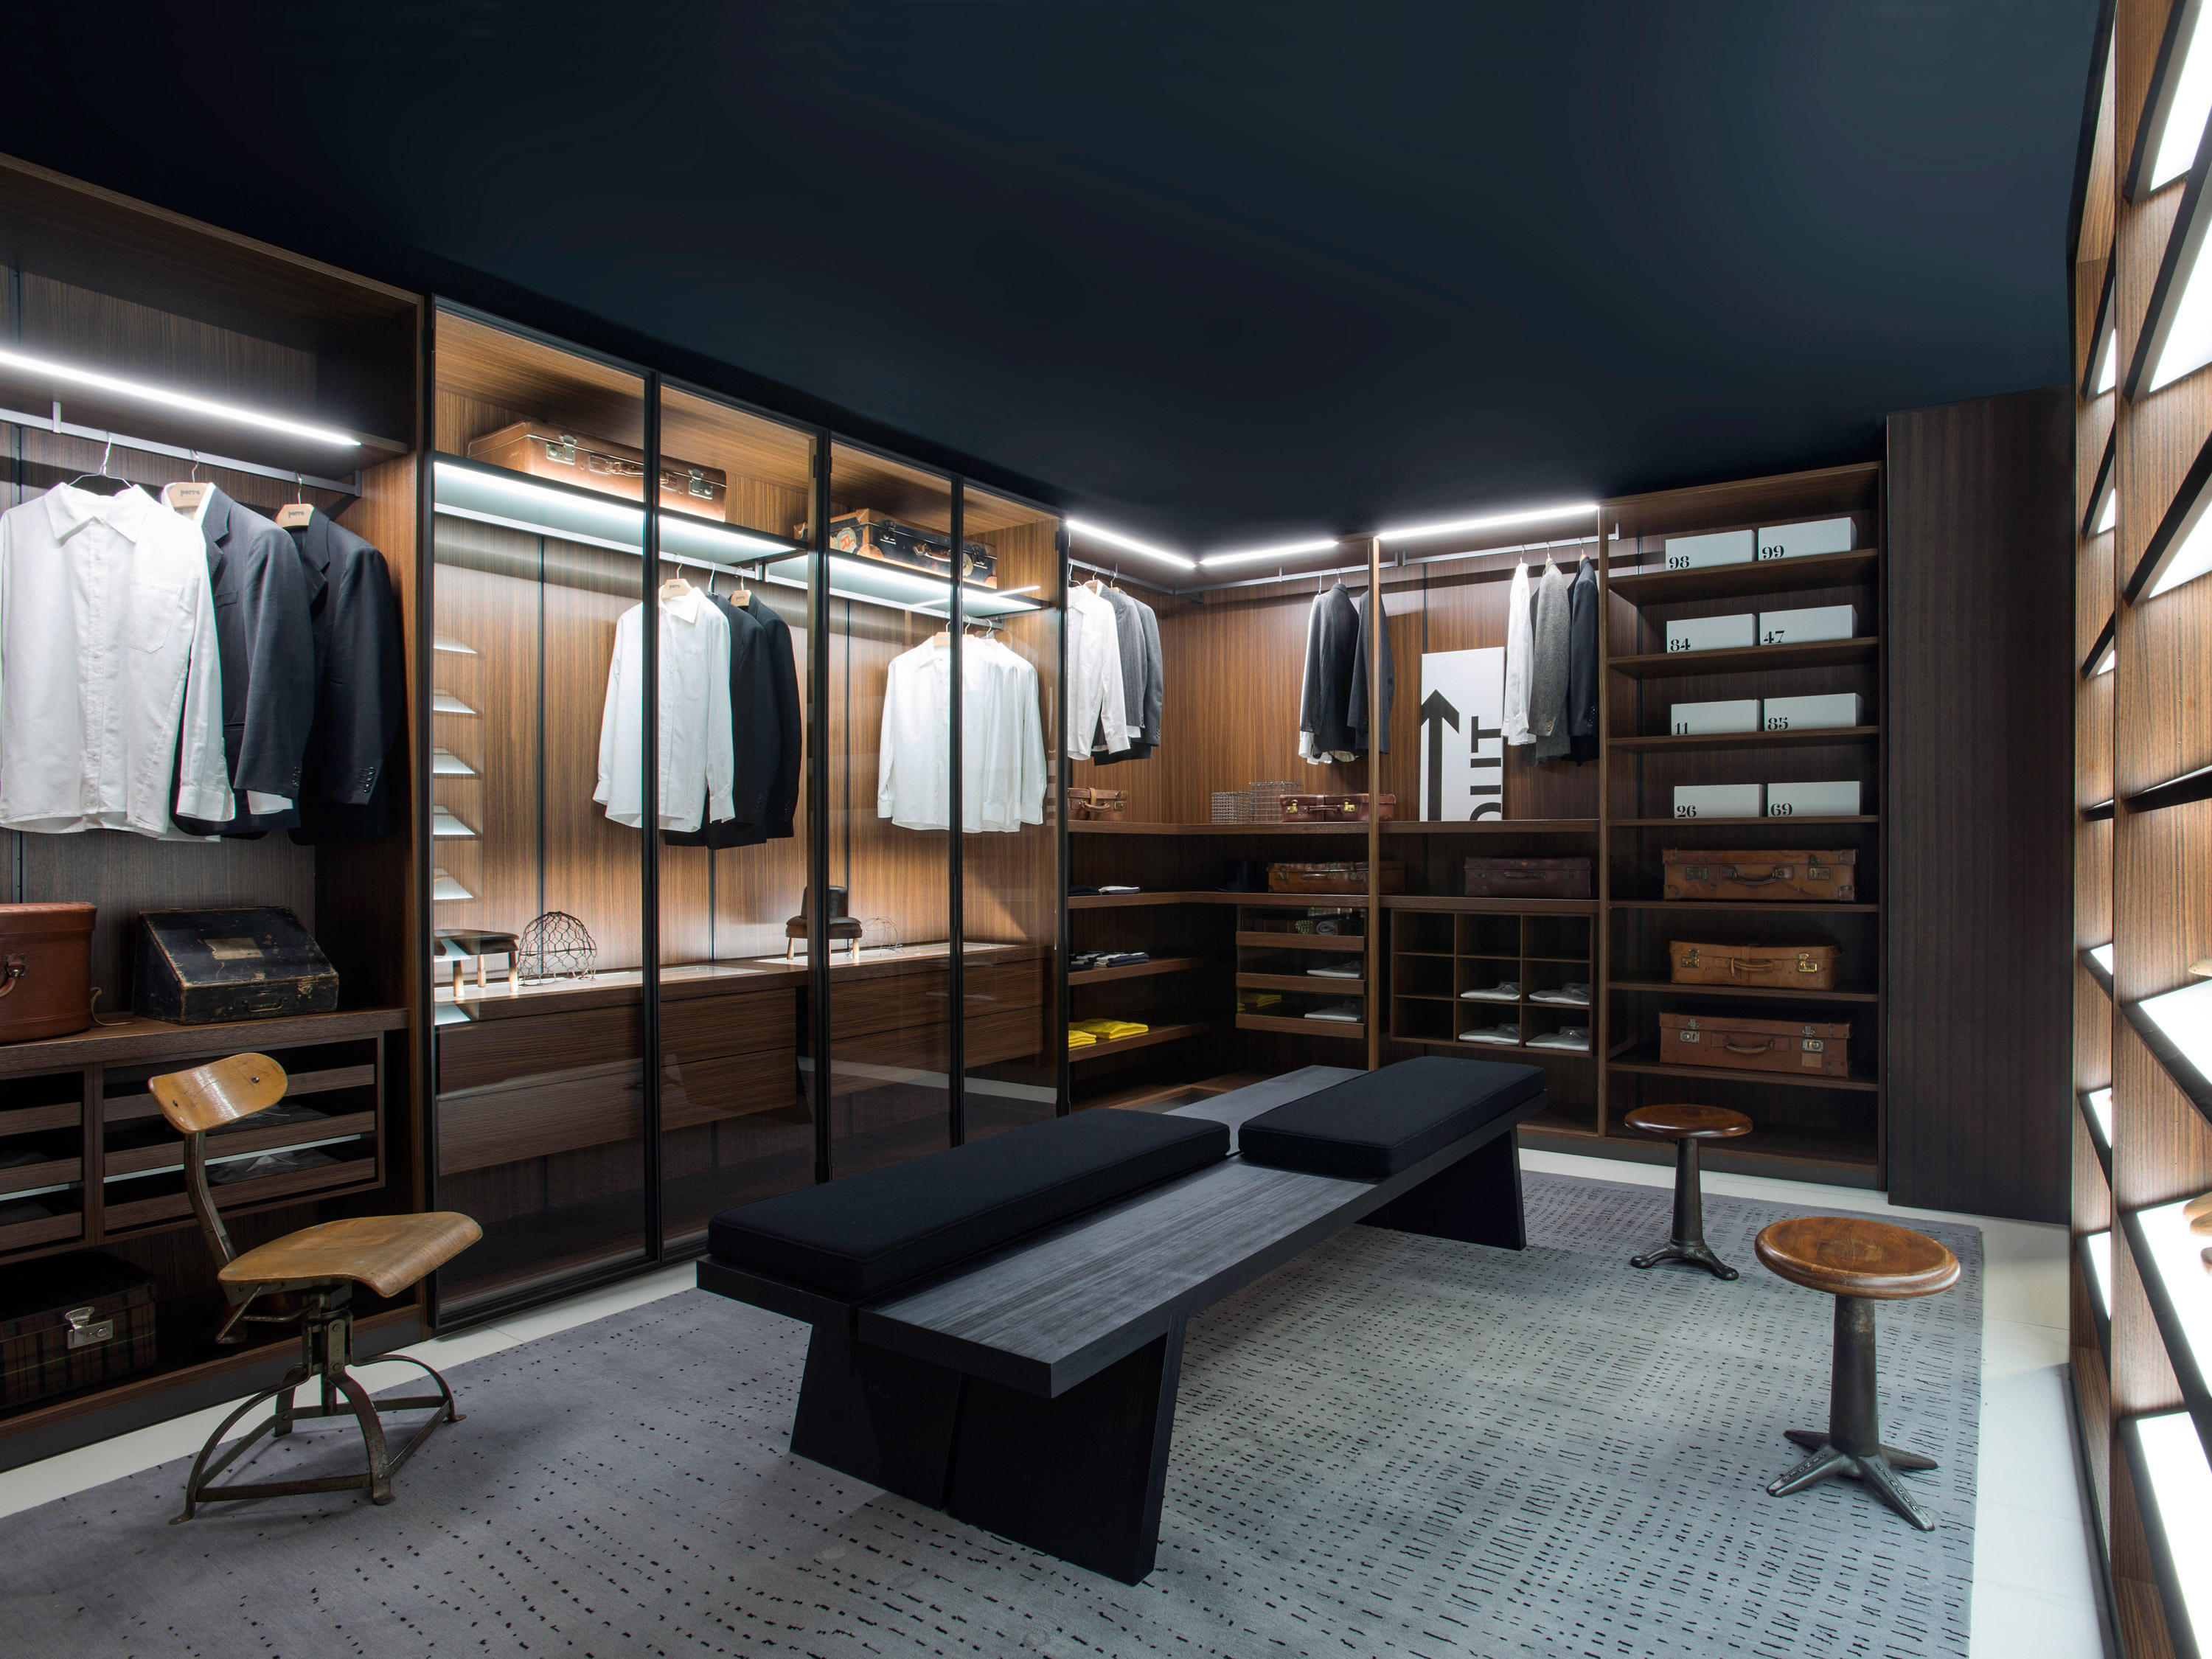 11 tips to design form-fitting walk-in wardrobes